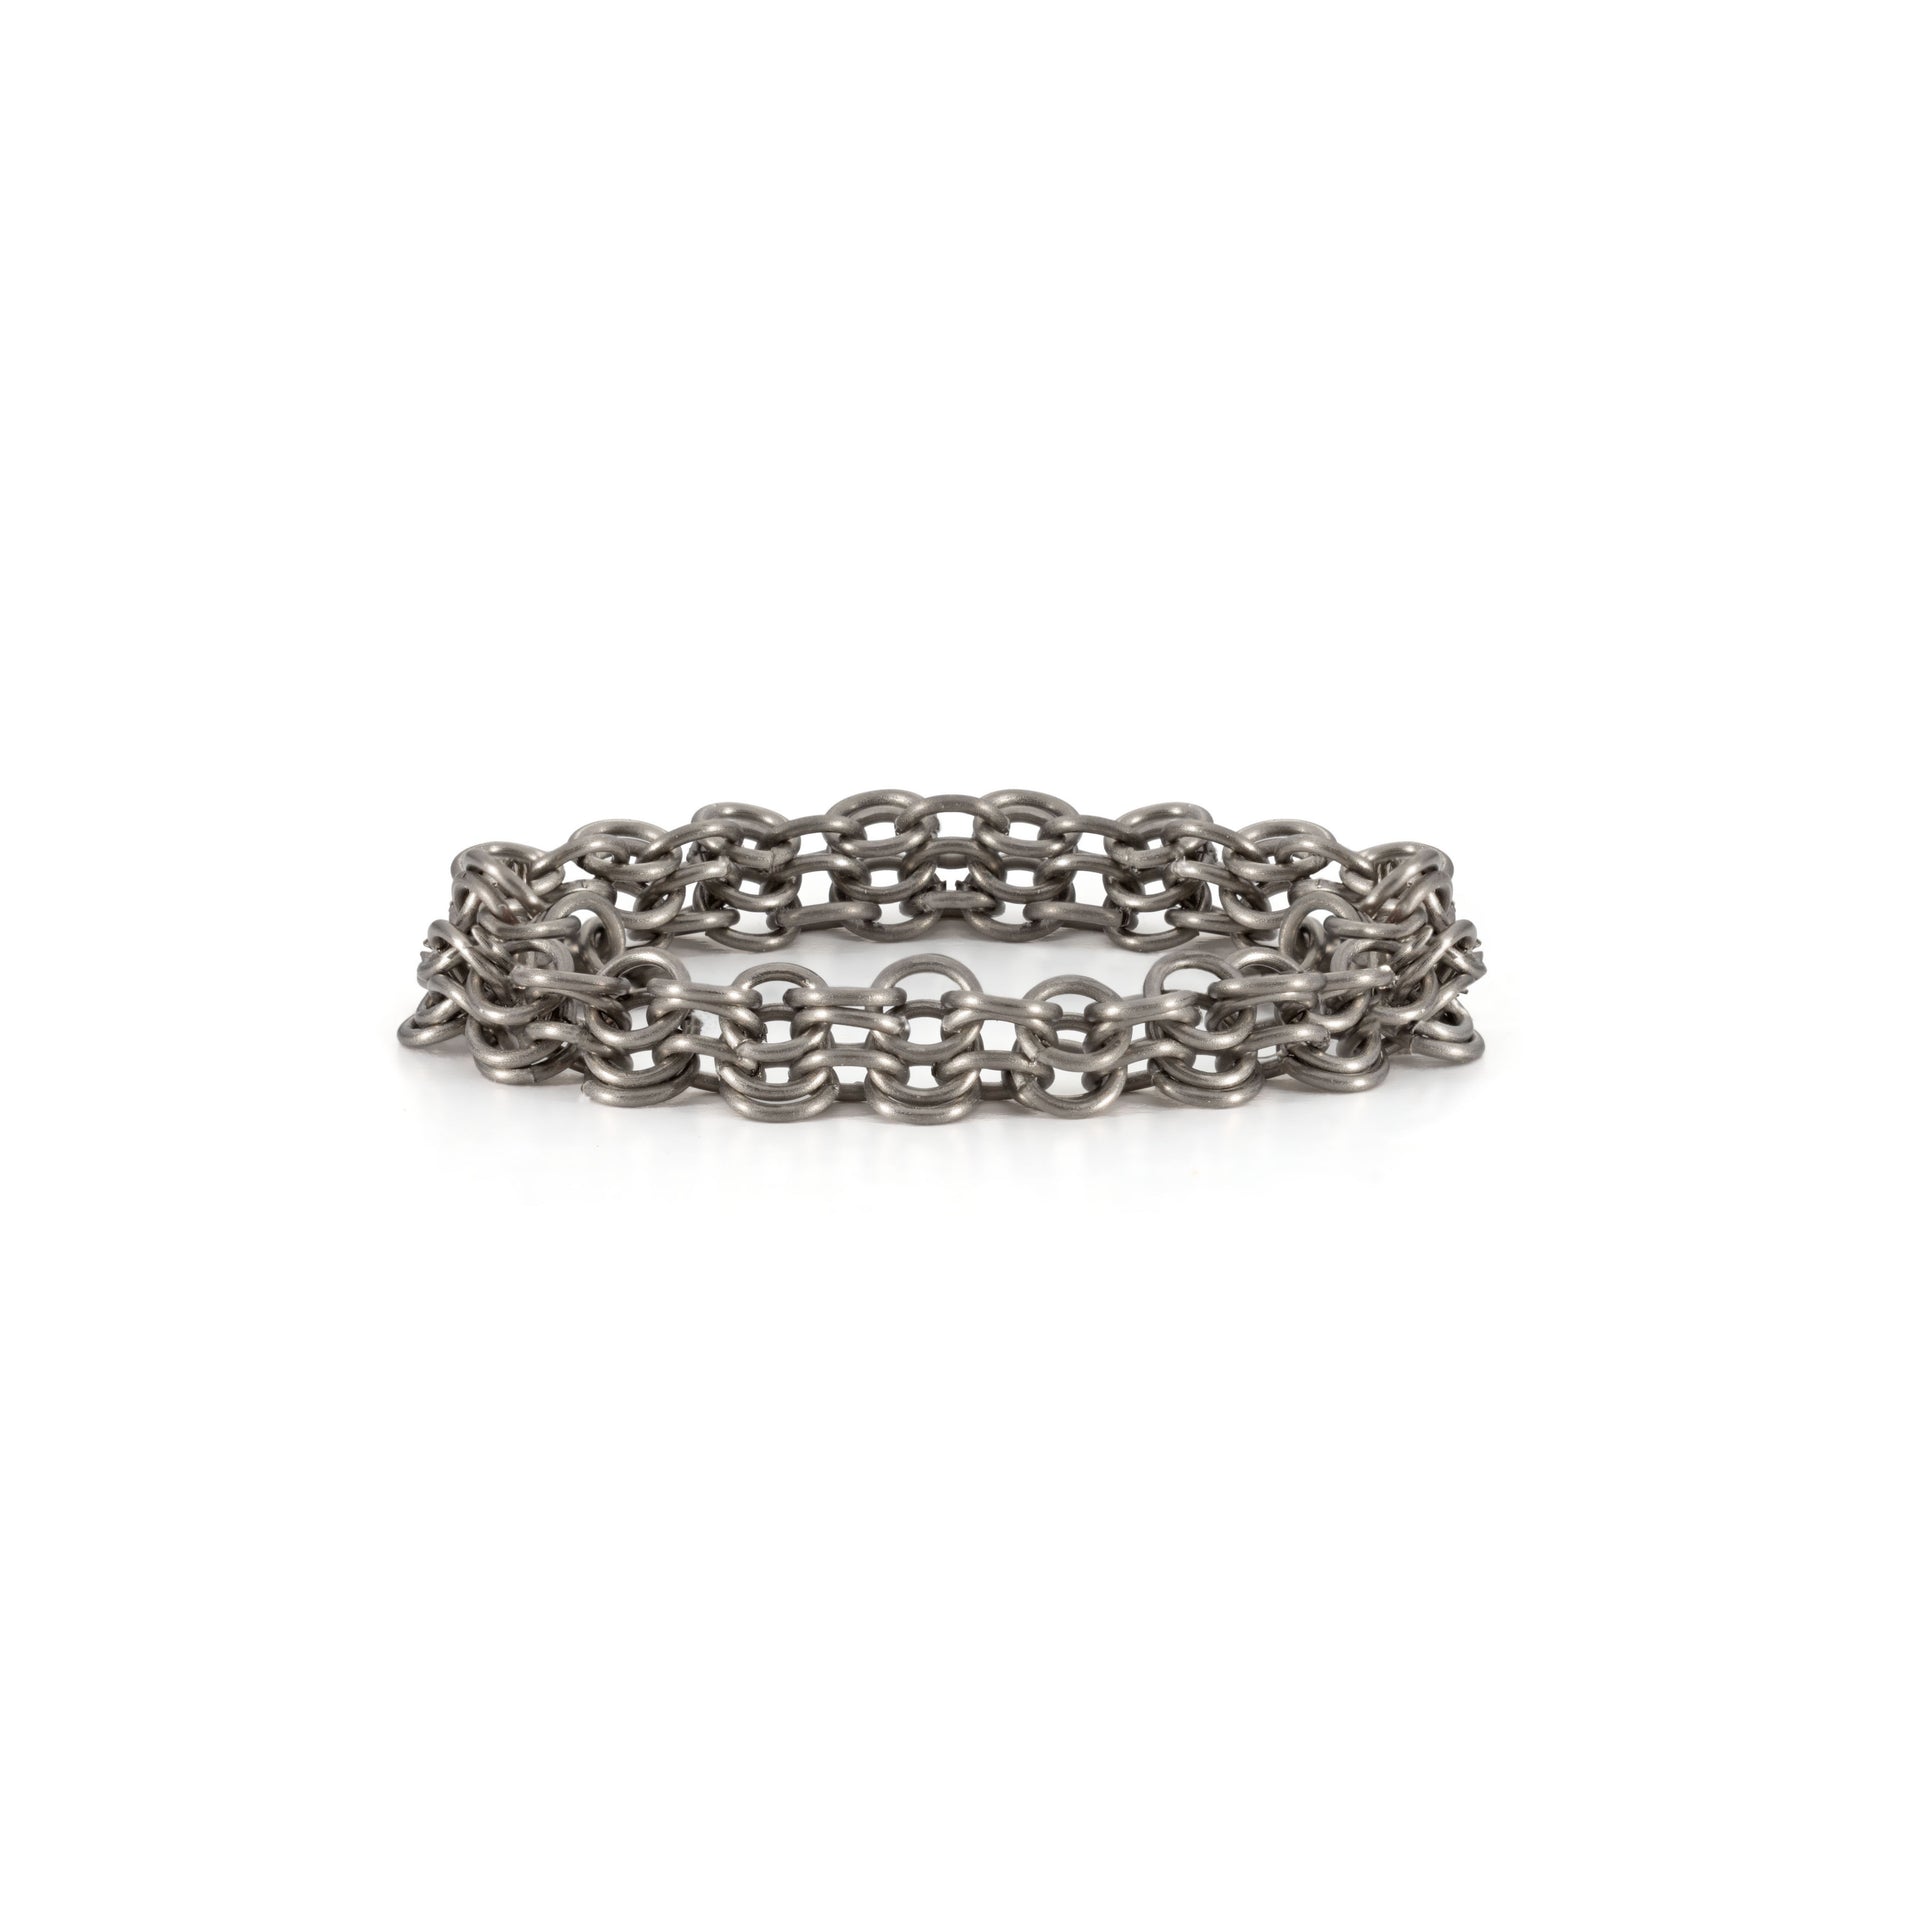 Storm chainmail ring handmade from titanium. Handcrafted contemporary jewellery by Corrinne Eira Evans